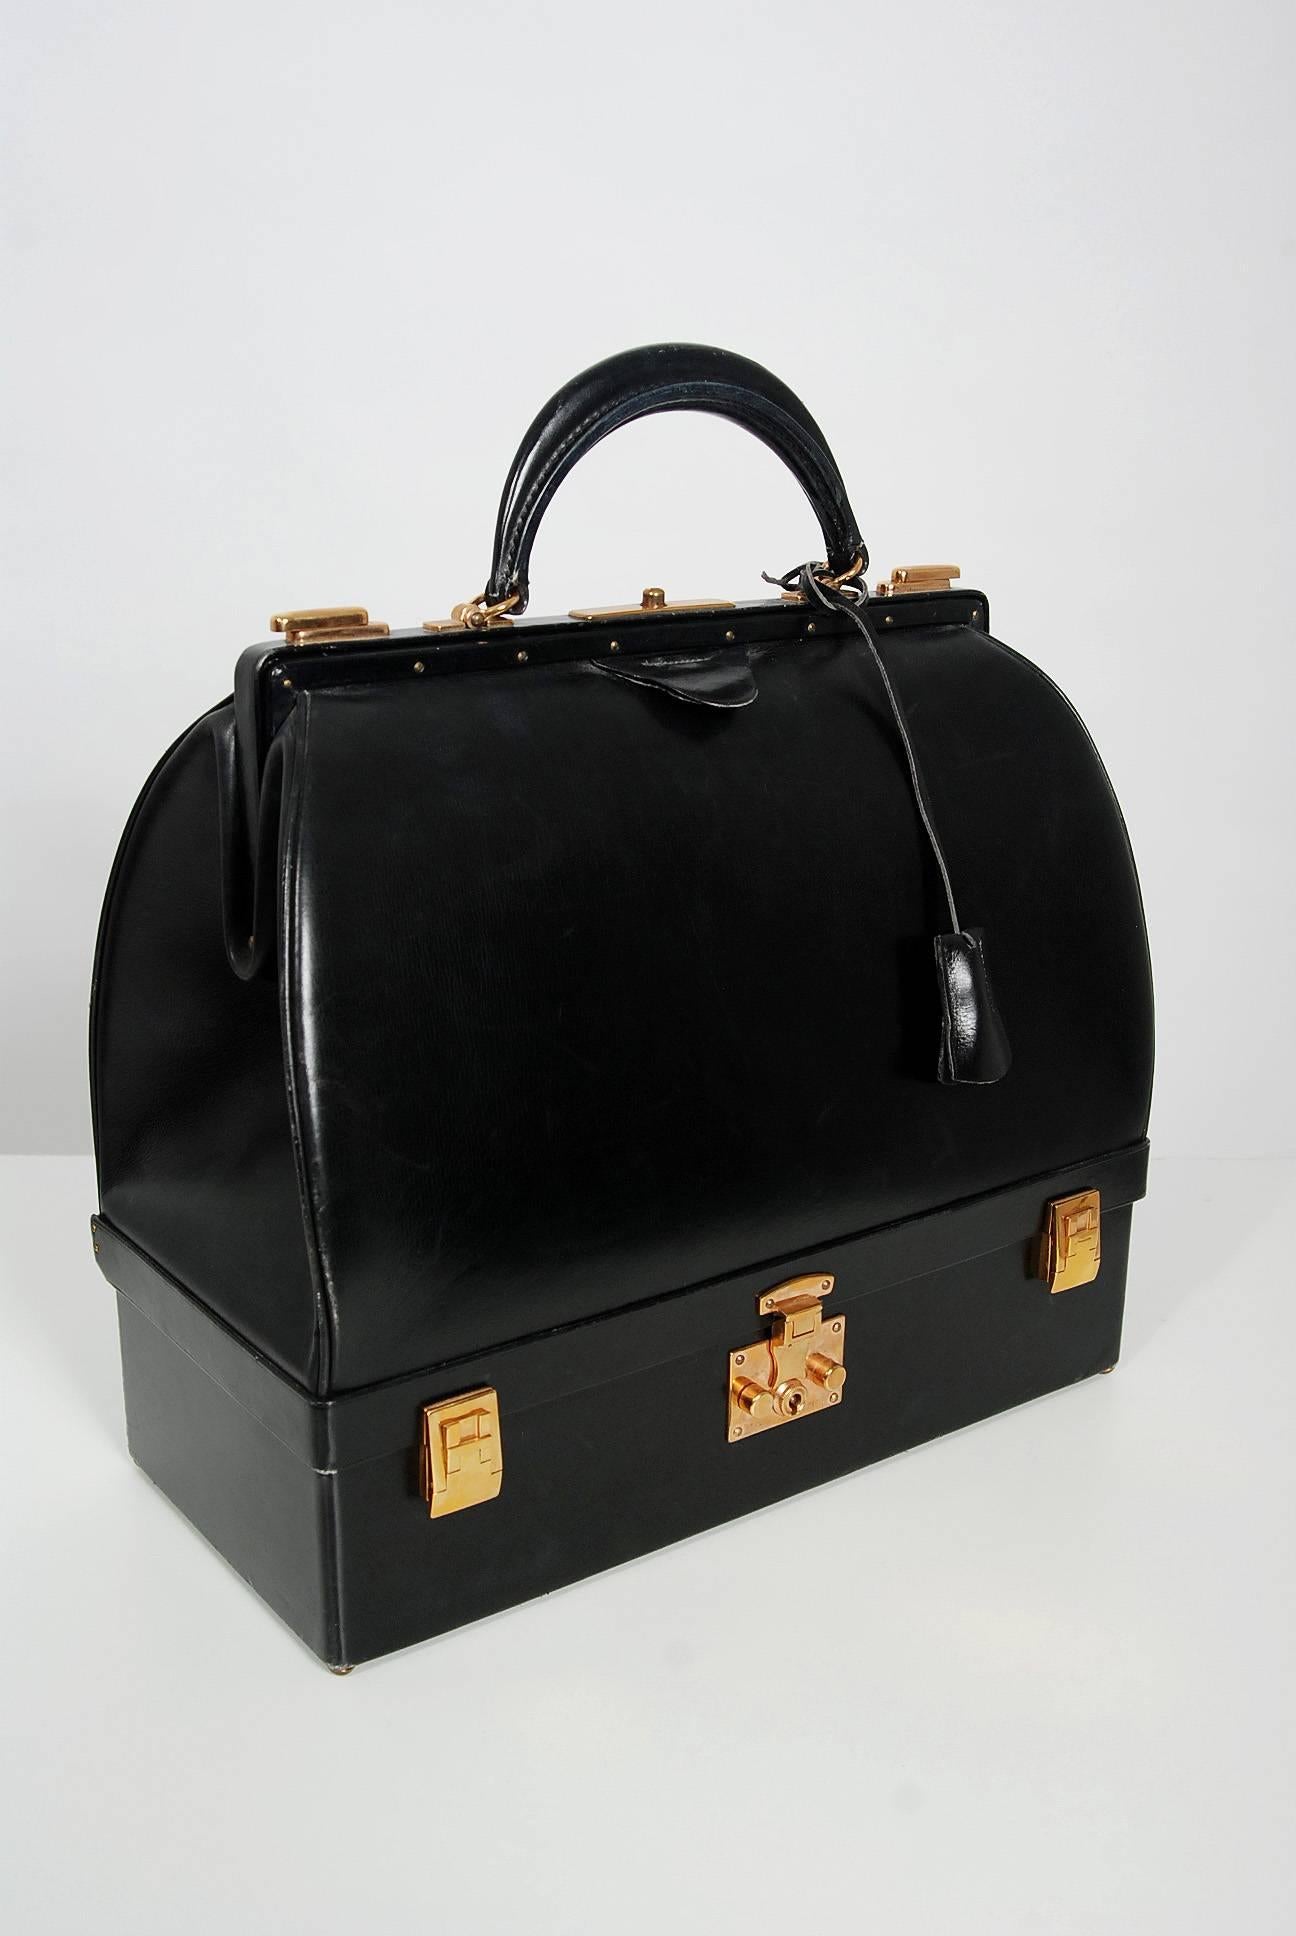 Hermès Paris has whispered the ultimate in luxury since 1837. This beautiful Sac Mallette, dating back to the mid 1970's, is a perfect example of this brand's elegant allure. The exterior features beautiful black box calfskin leather trimmed with